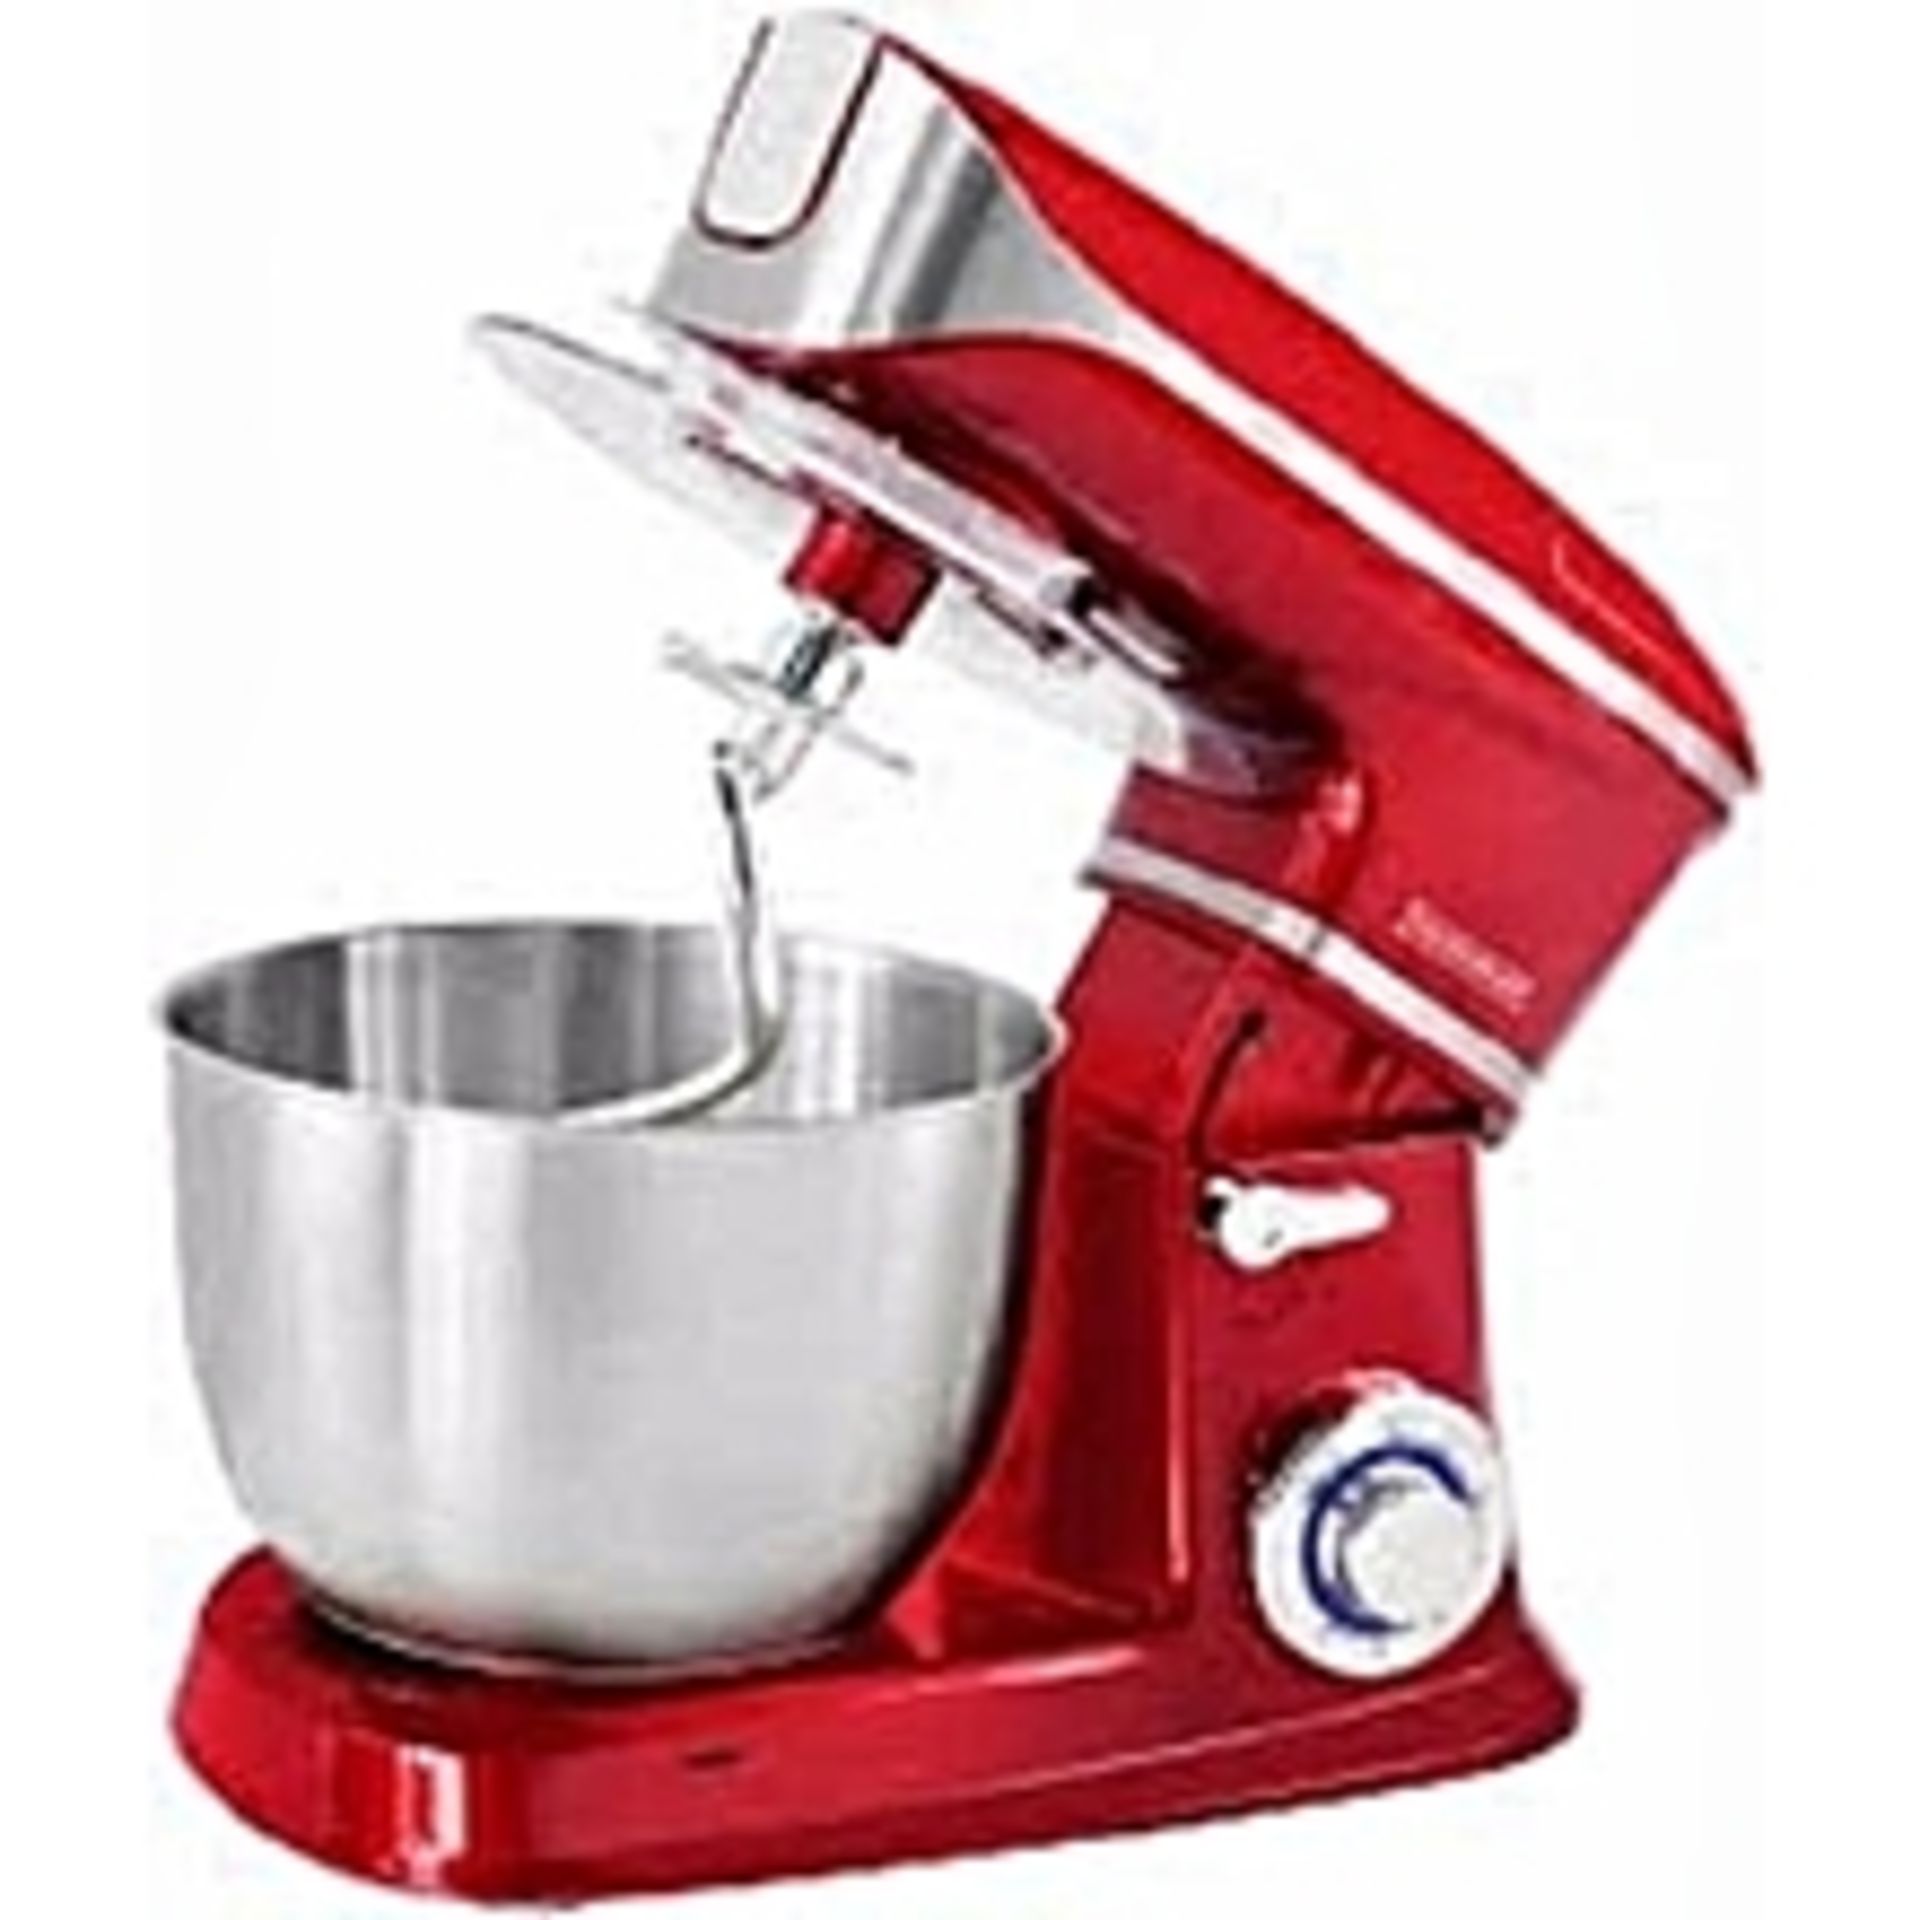 V Brand New Kitchen Food Mixer - 1900W - 6 Speed - Stainless Steel 6.5ltr bowl- Includes Dough - Image 2 of 2